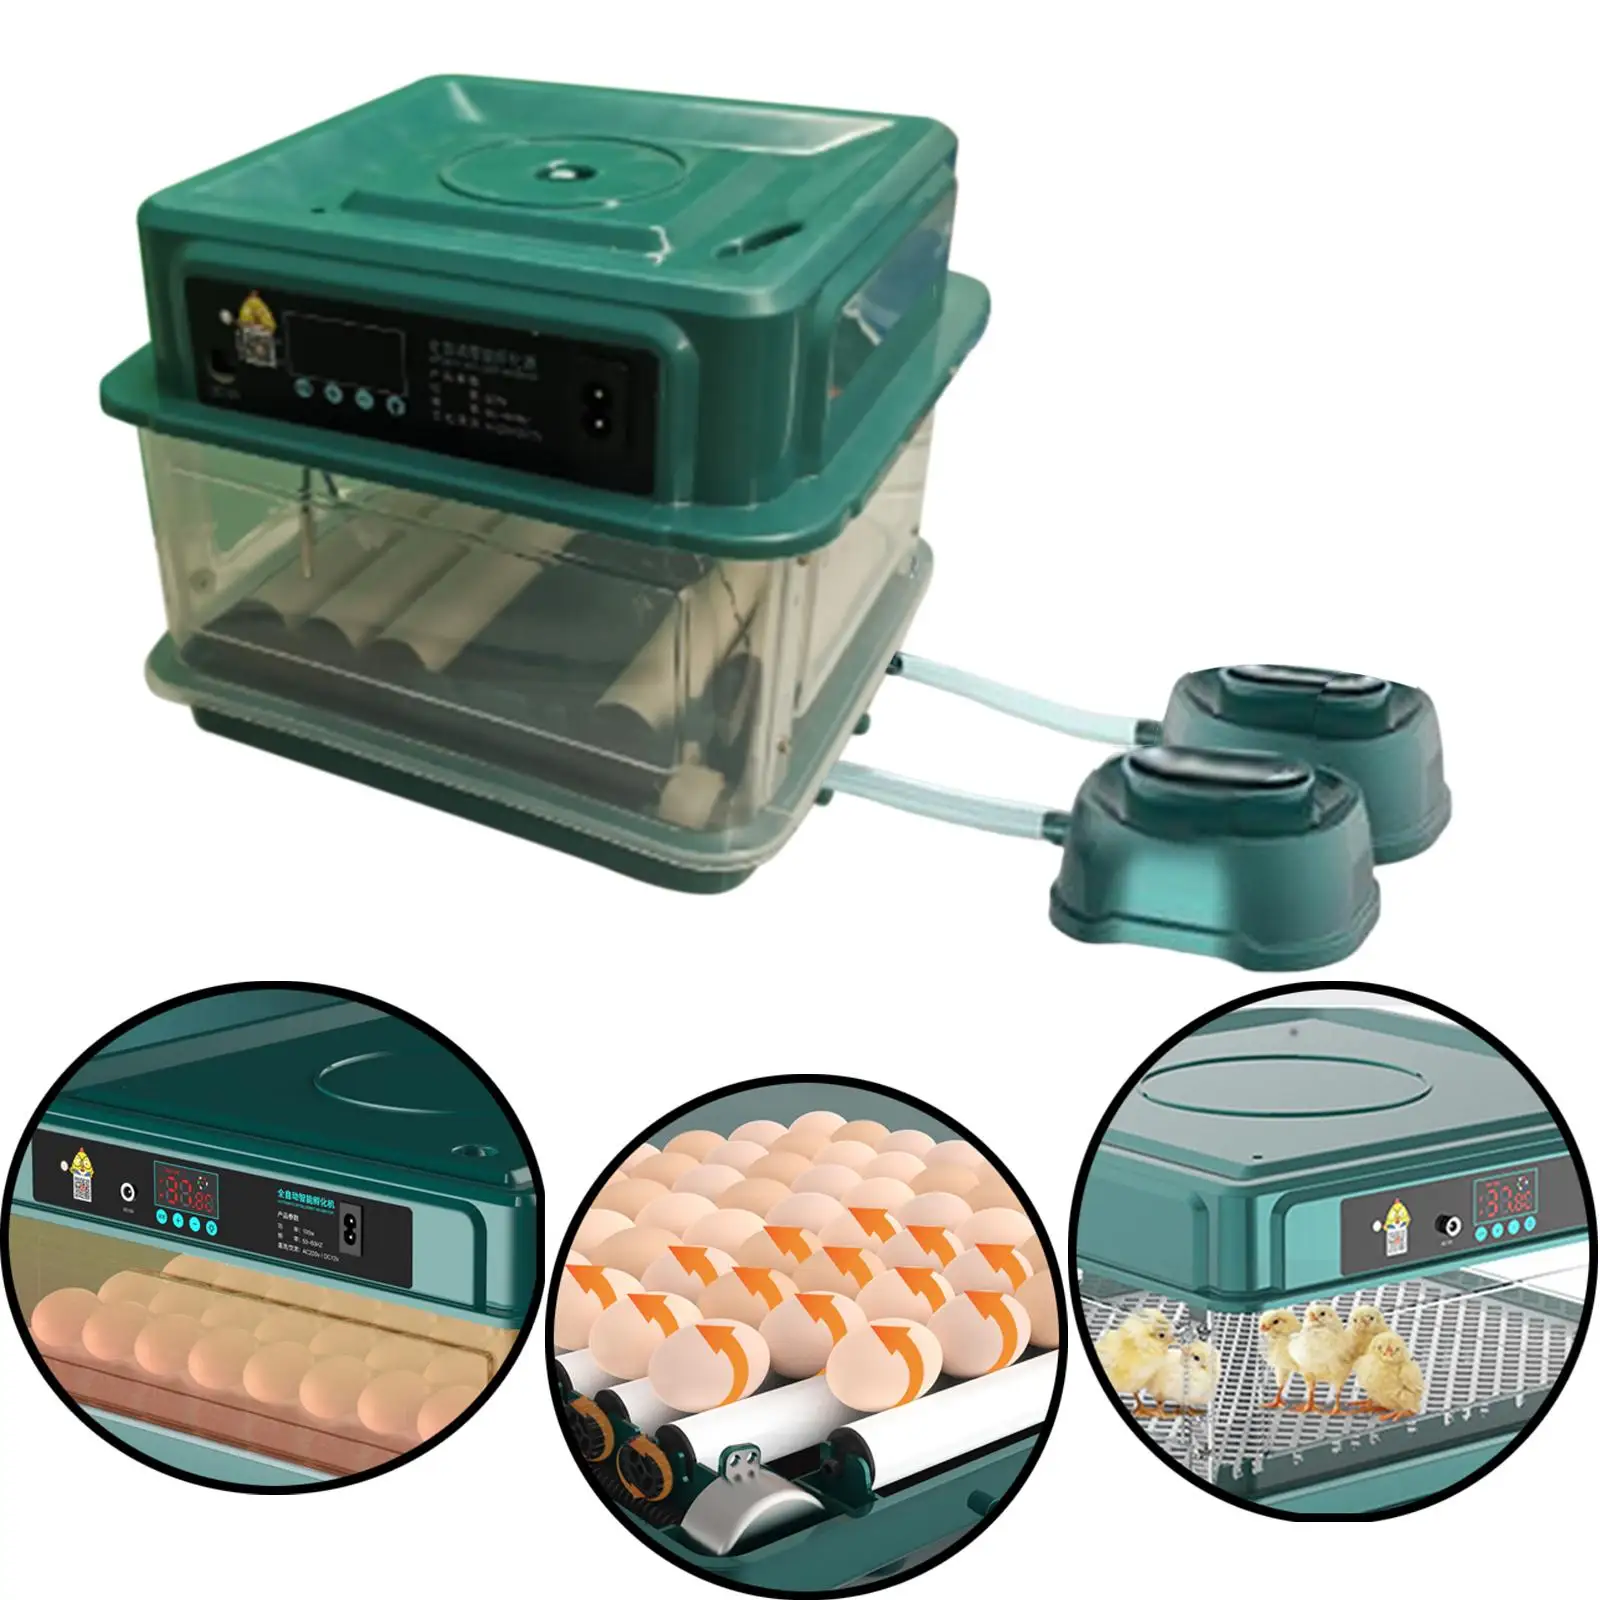 Egg Incubator Automatic Chick Incubator LED Display for Goose Chicken 24 Eggs